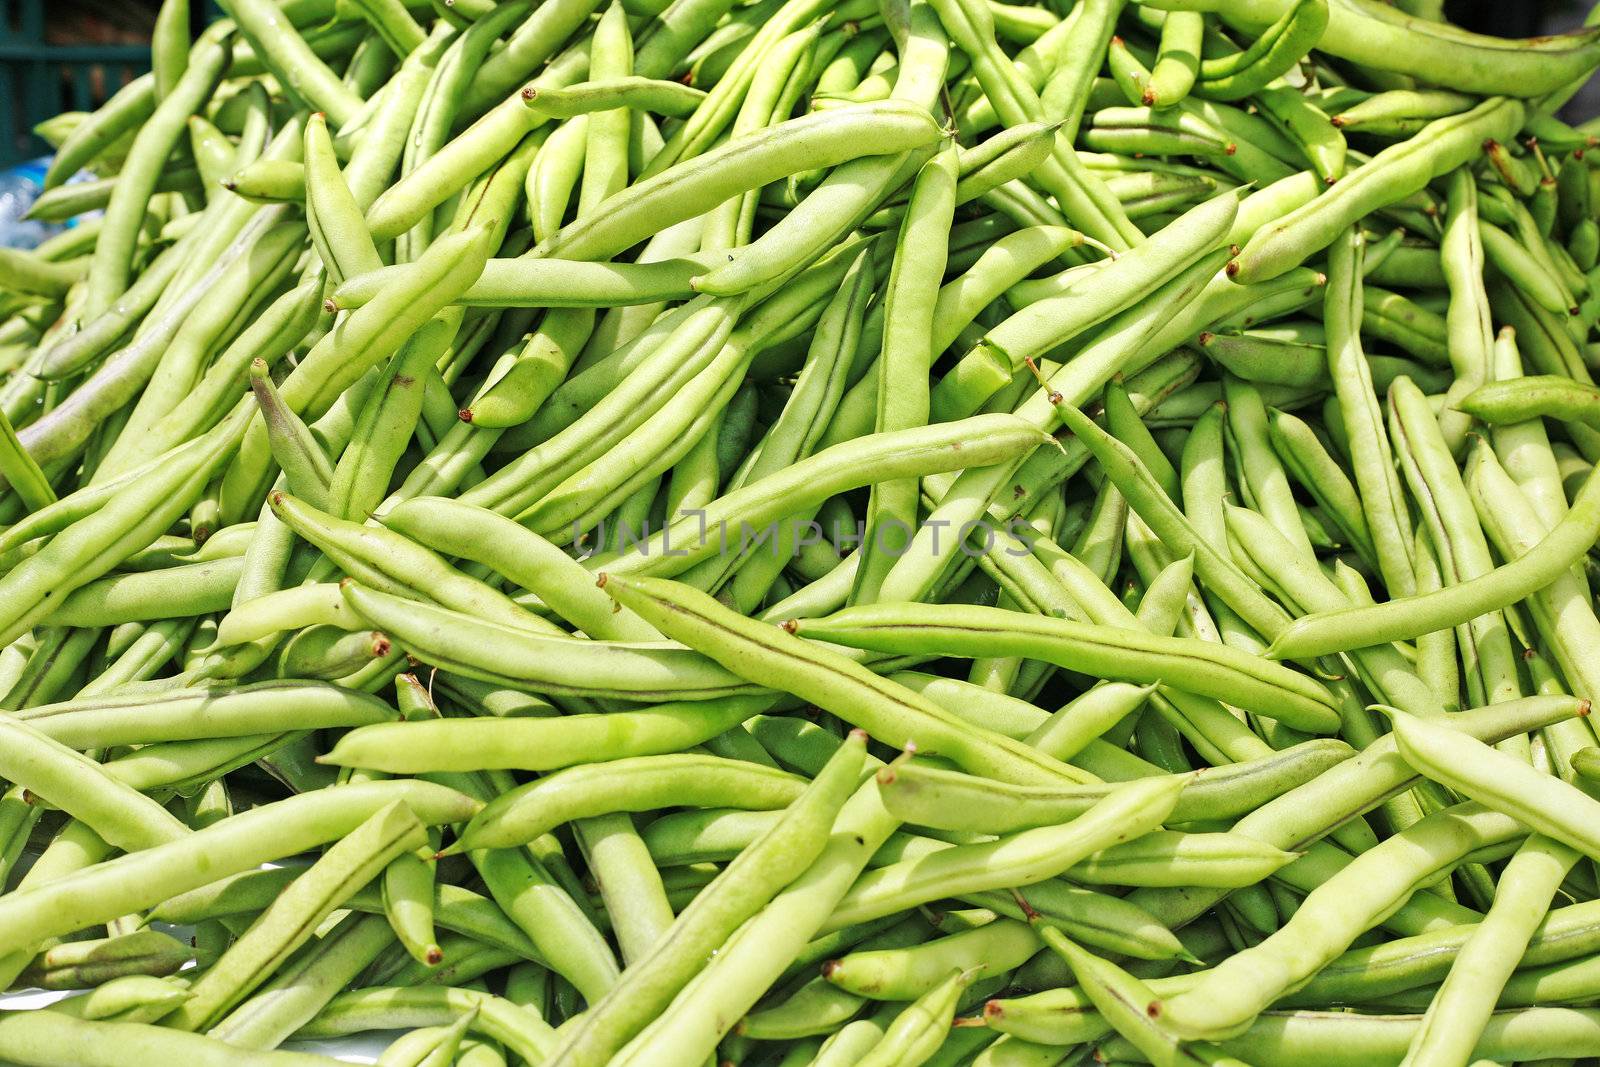 Many green beans (Phaseolus vulgaris L.) on a pile